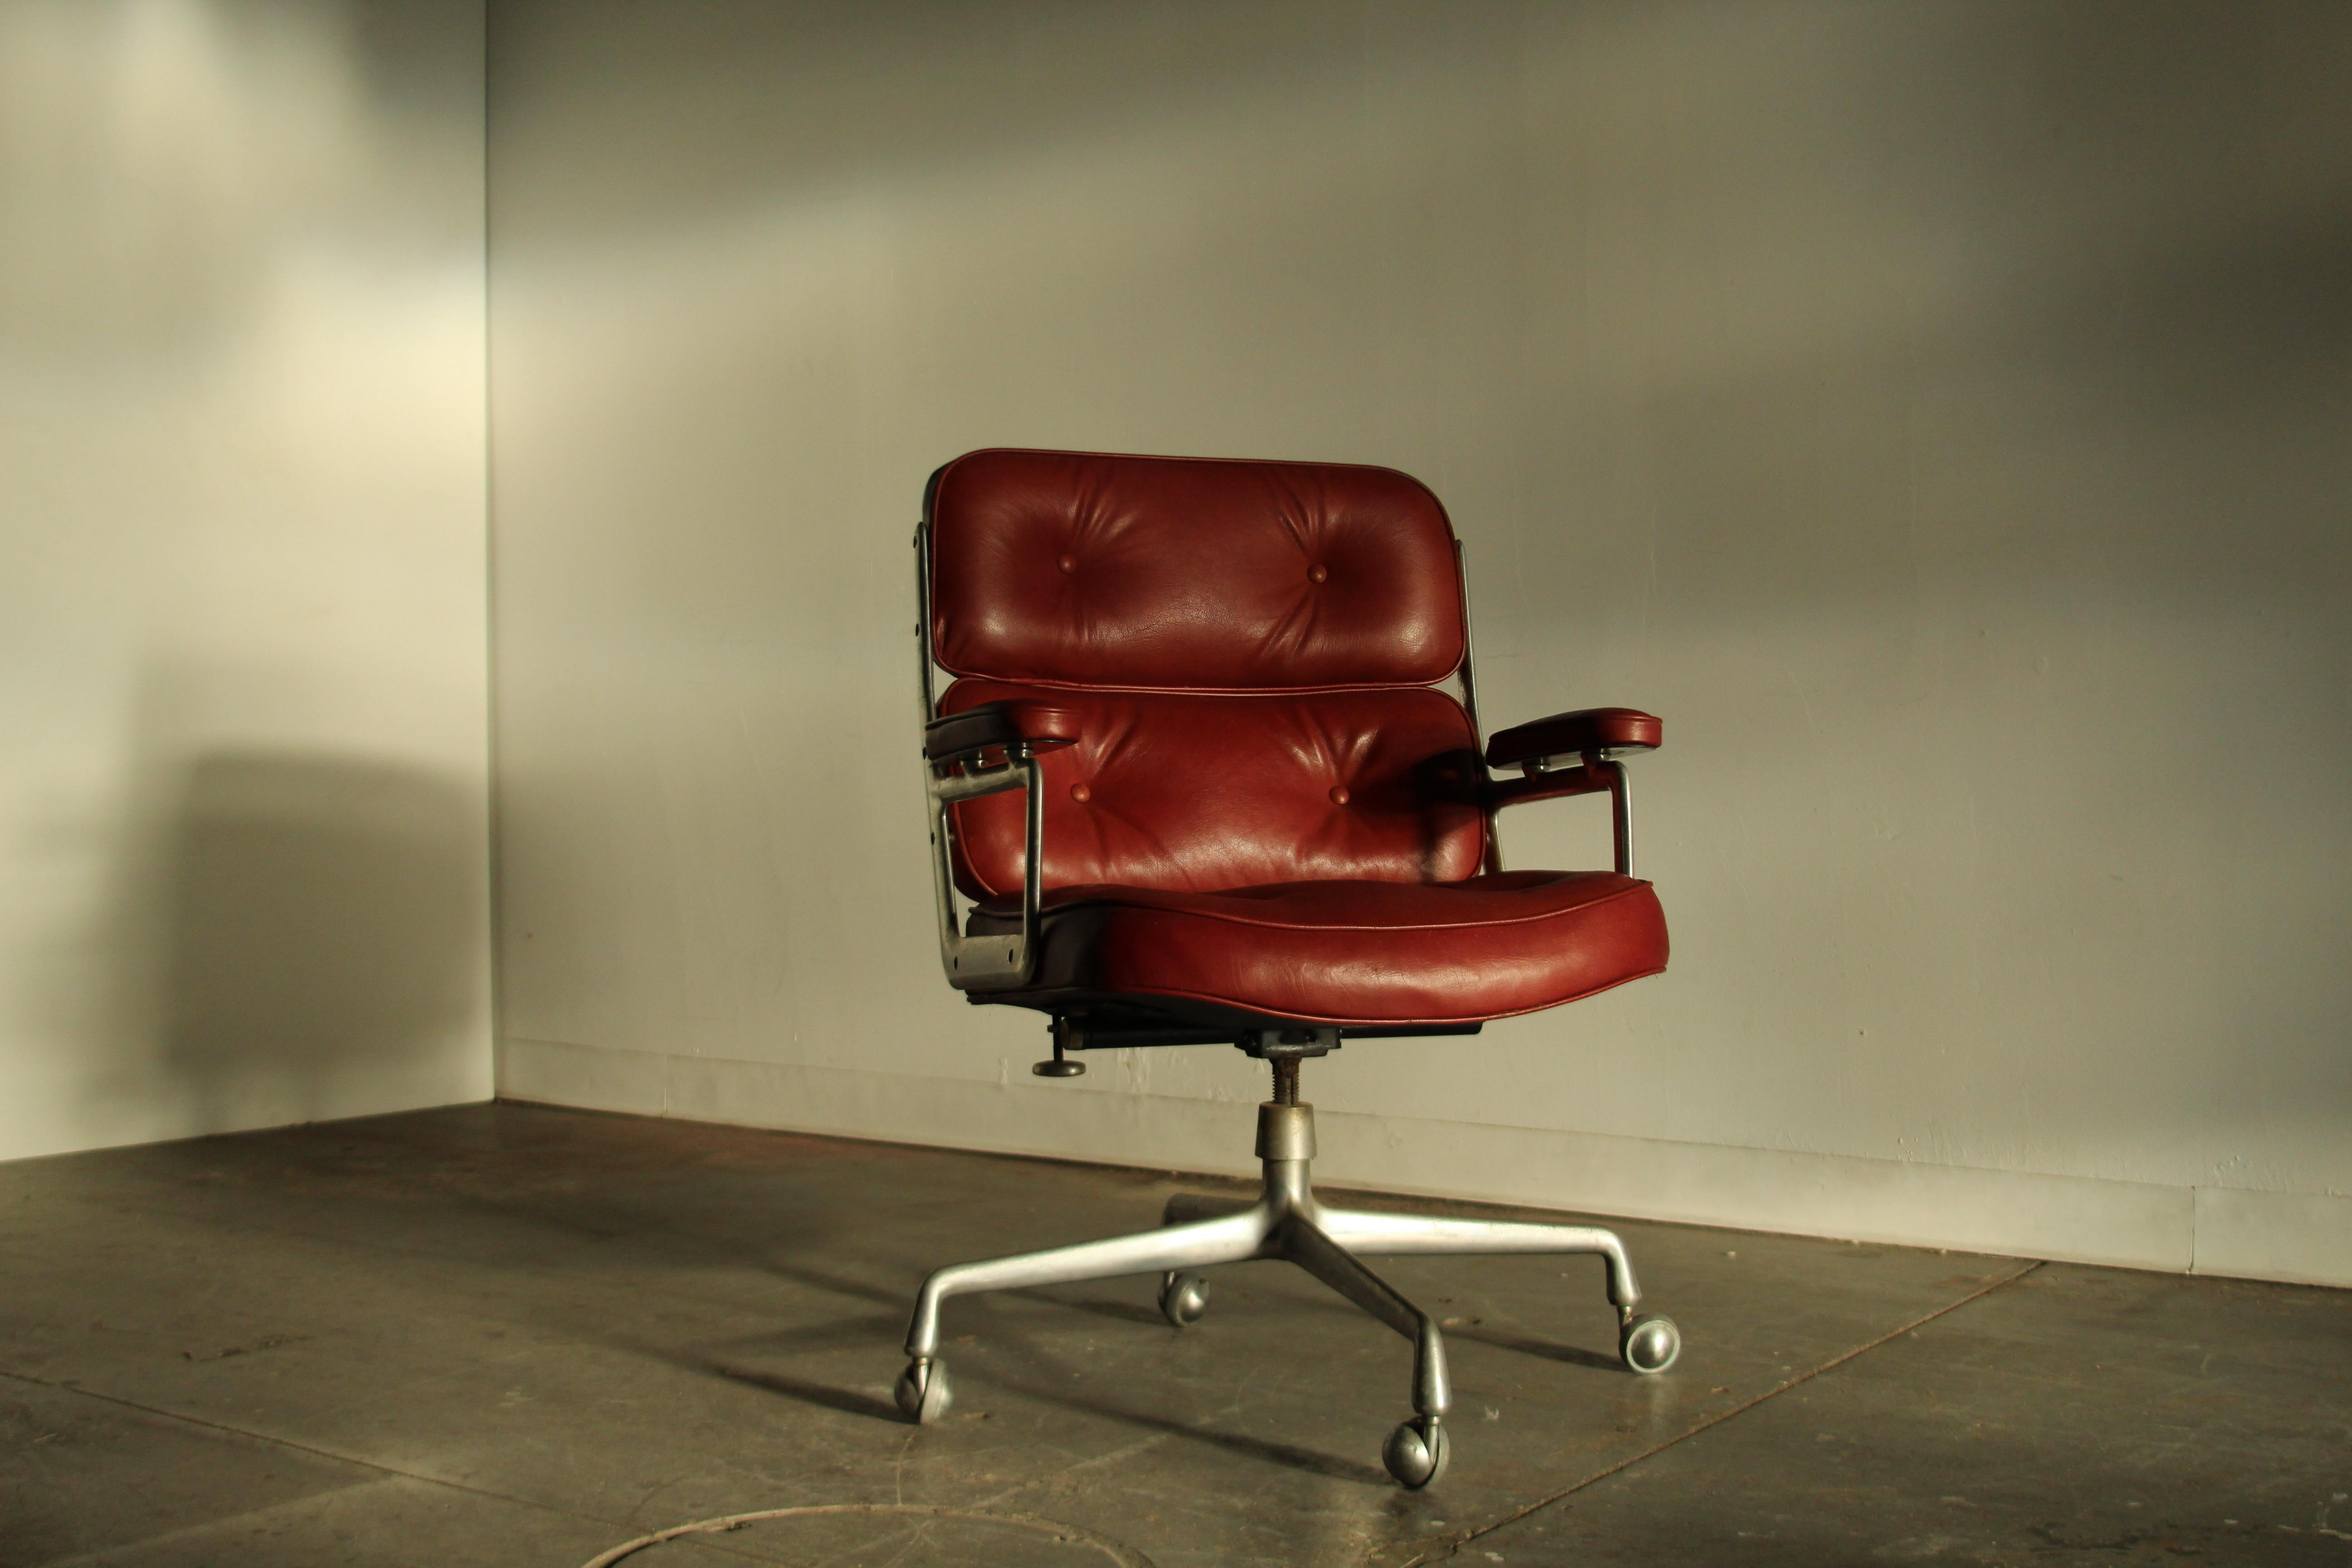 A fantastic vintage 1970s example of the Eames Time Life Executive chair, quite simply the ultimate desk chair. Supreme comfort with amazing tilt back mechanism. Built to last forever. This chair has been reupholstered in an absolutely stunning,